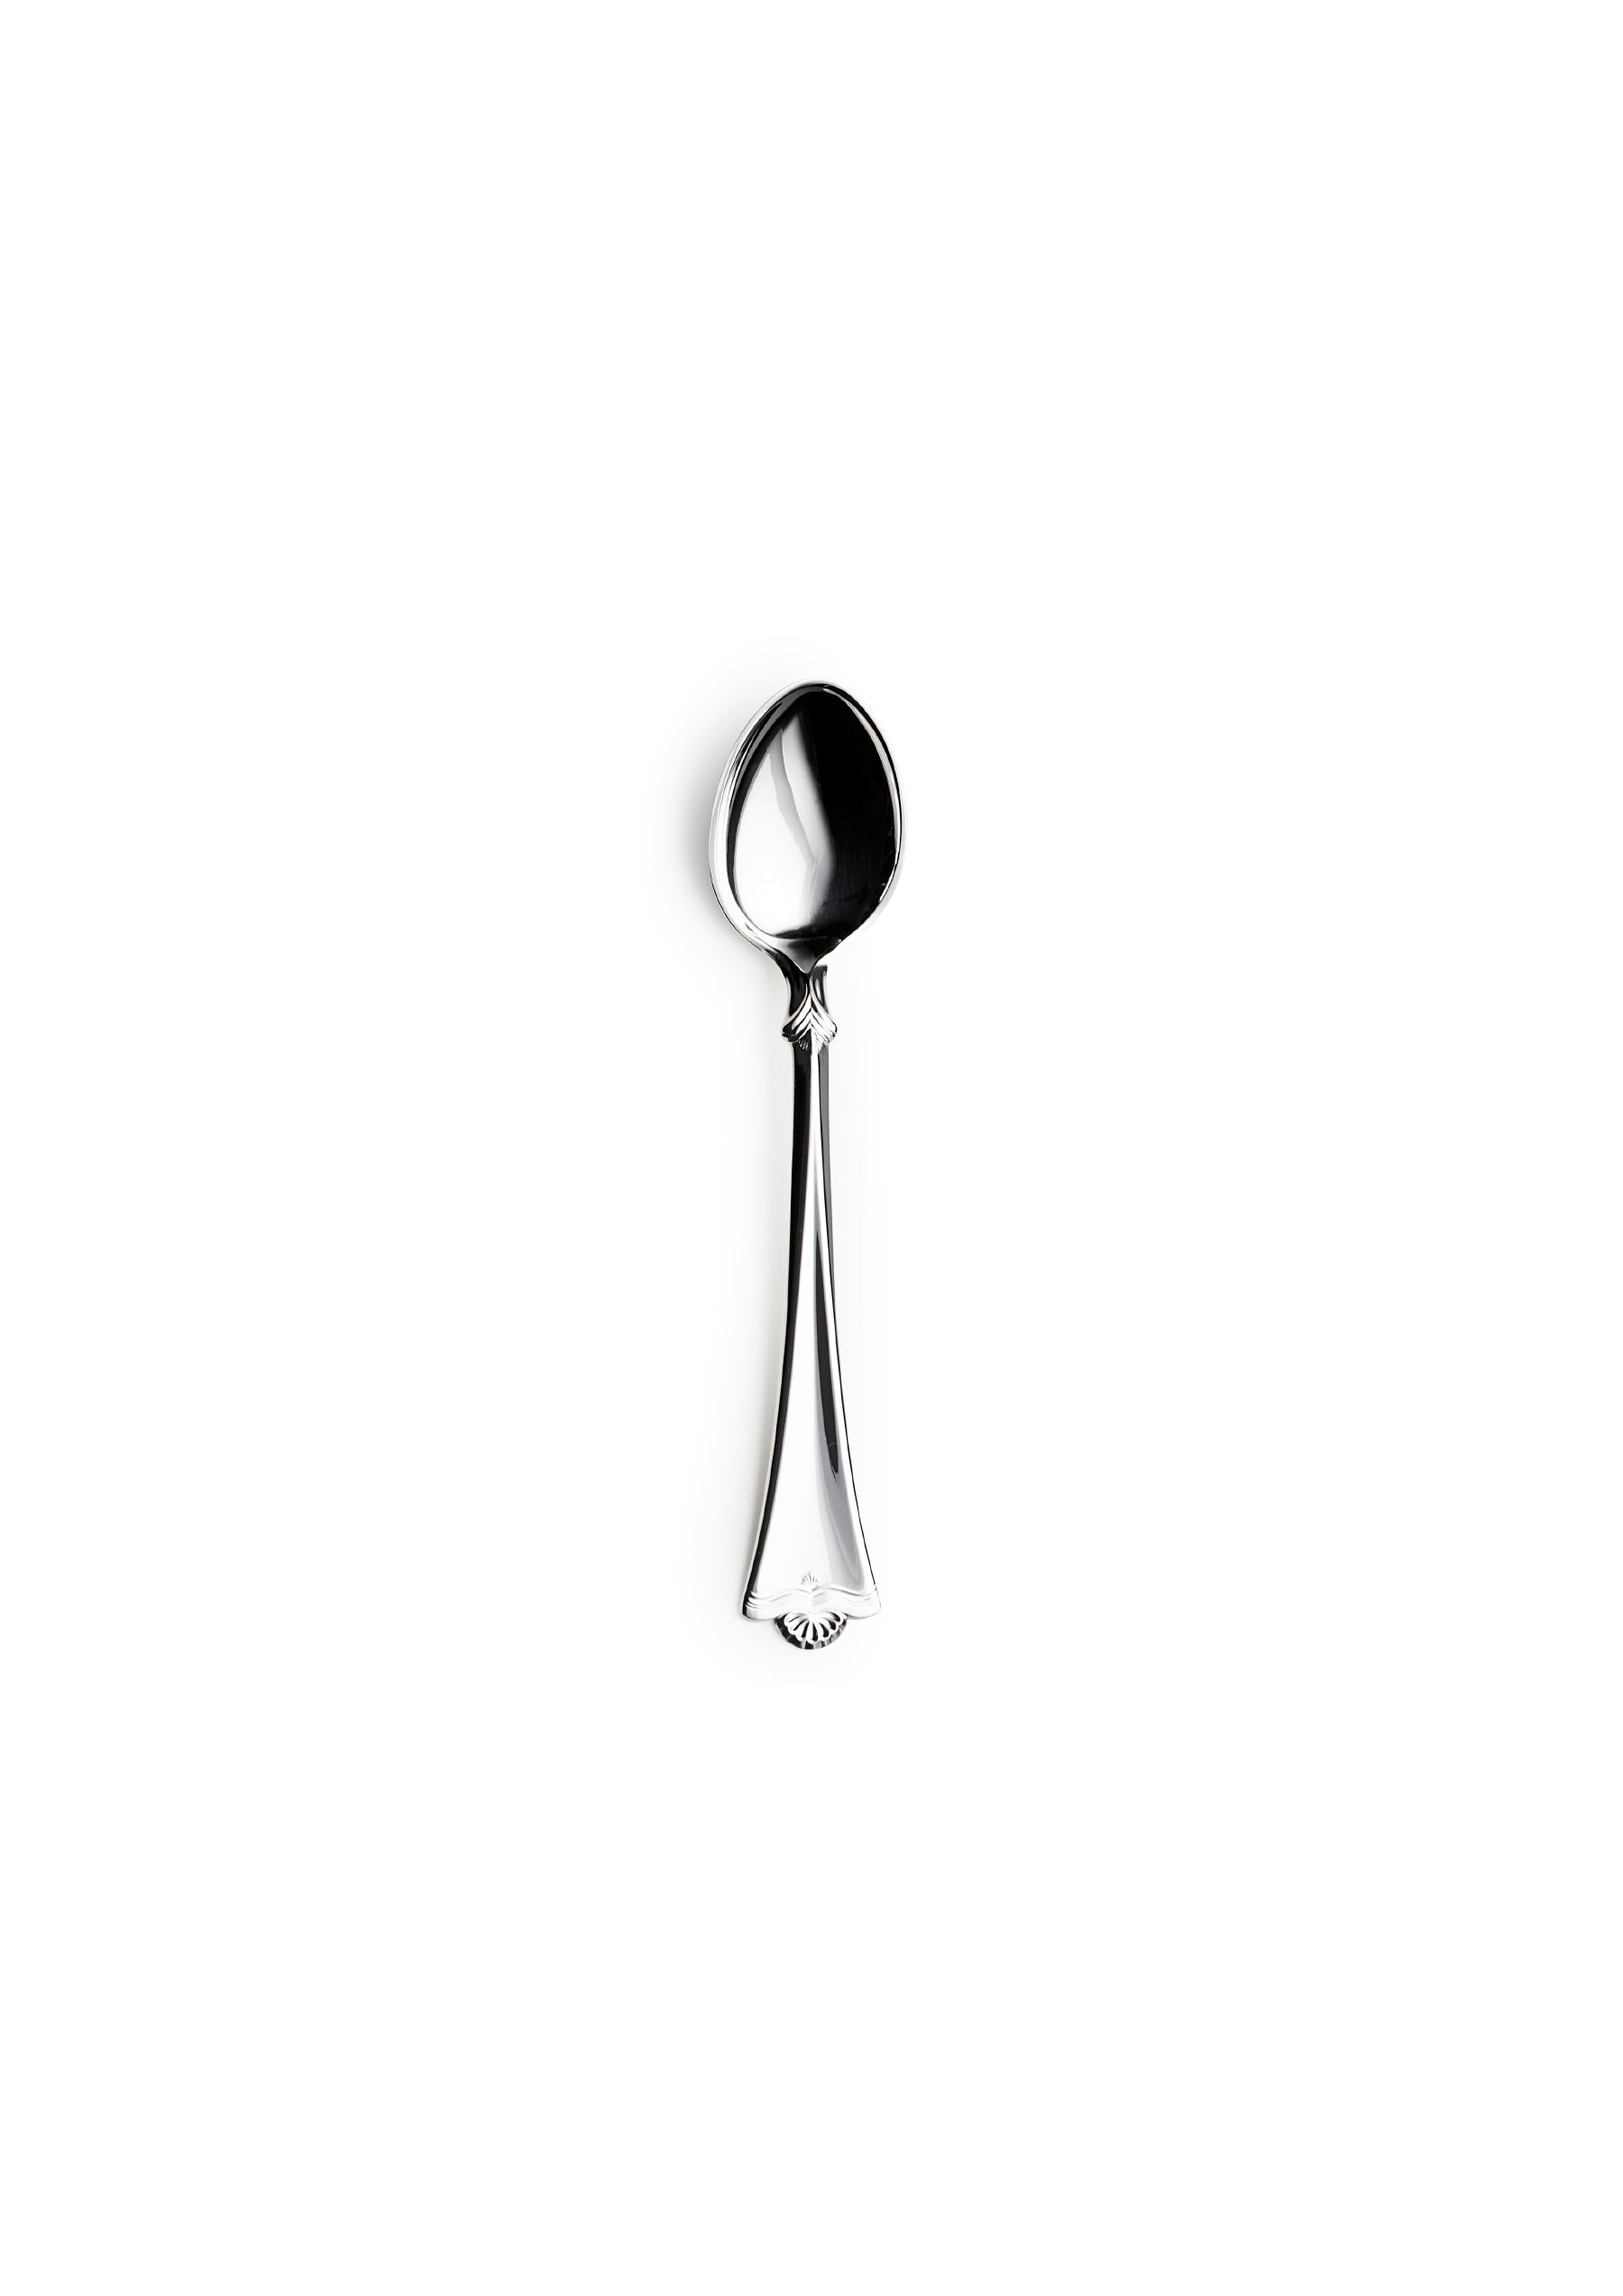 Lily of the valley coffee spoon